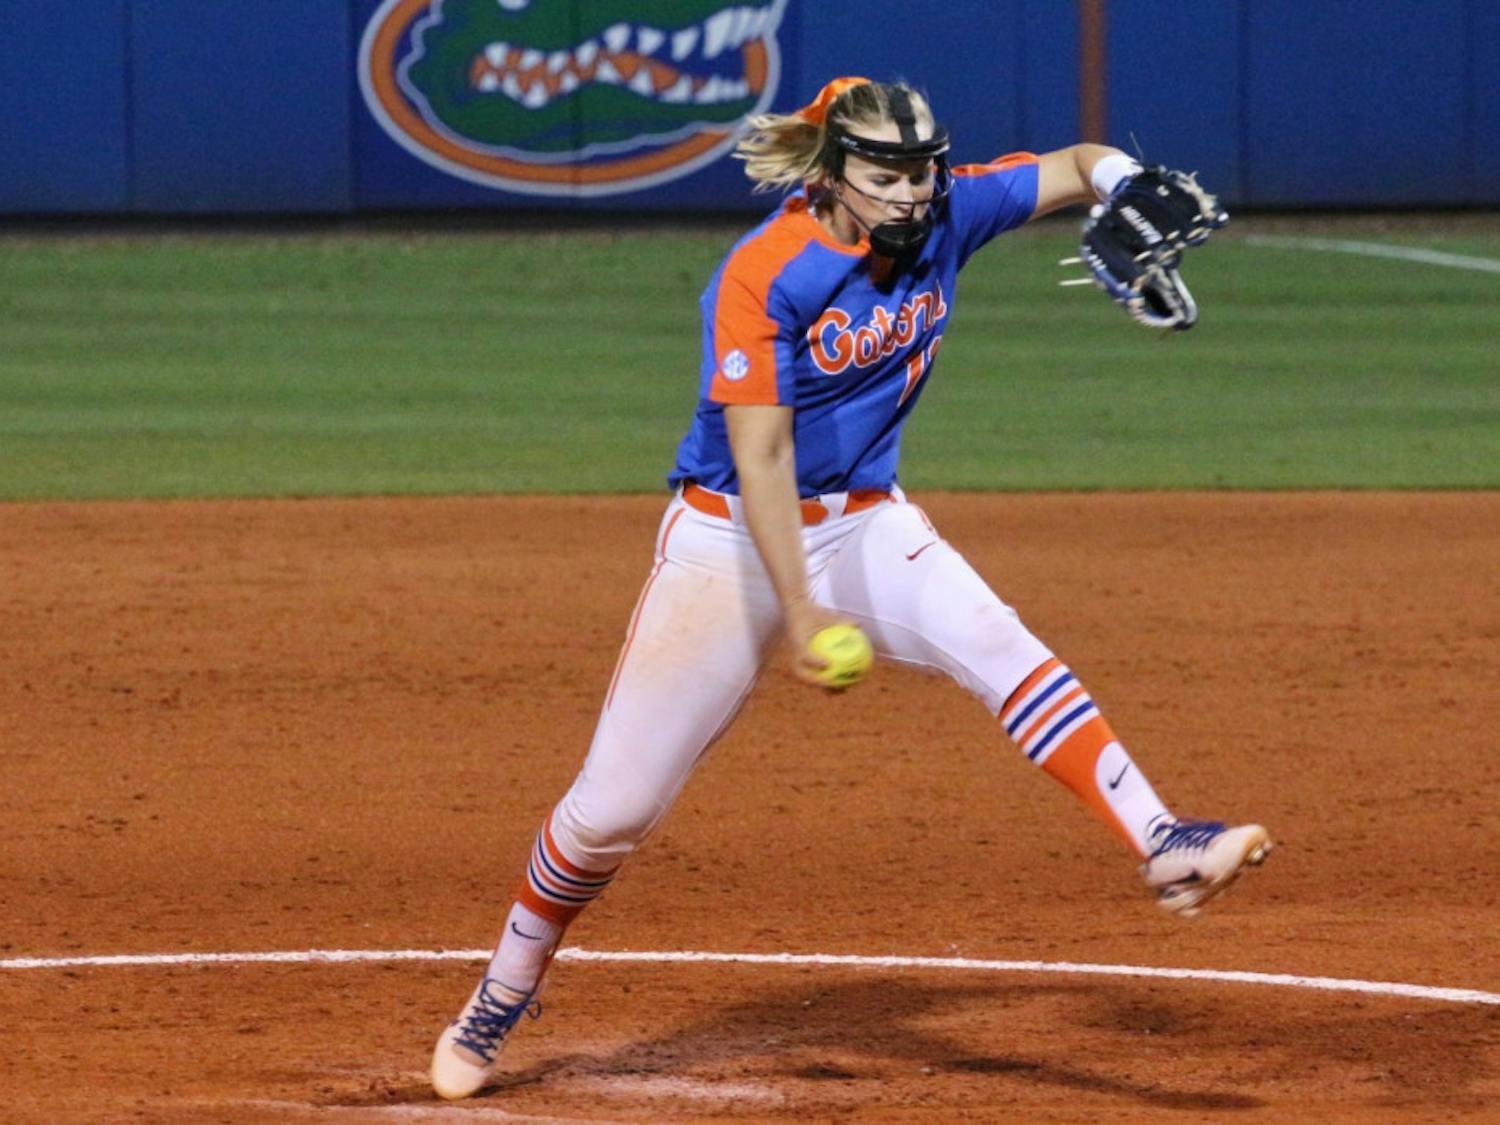 Florida pitcher Kelly Barnhill struck out 11 batters and allowed just two hits during UF’s 7-1 win over USF on Sunday at the USF Opening Weekend Invitational.
&nbsp;